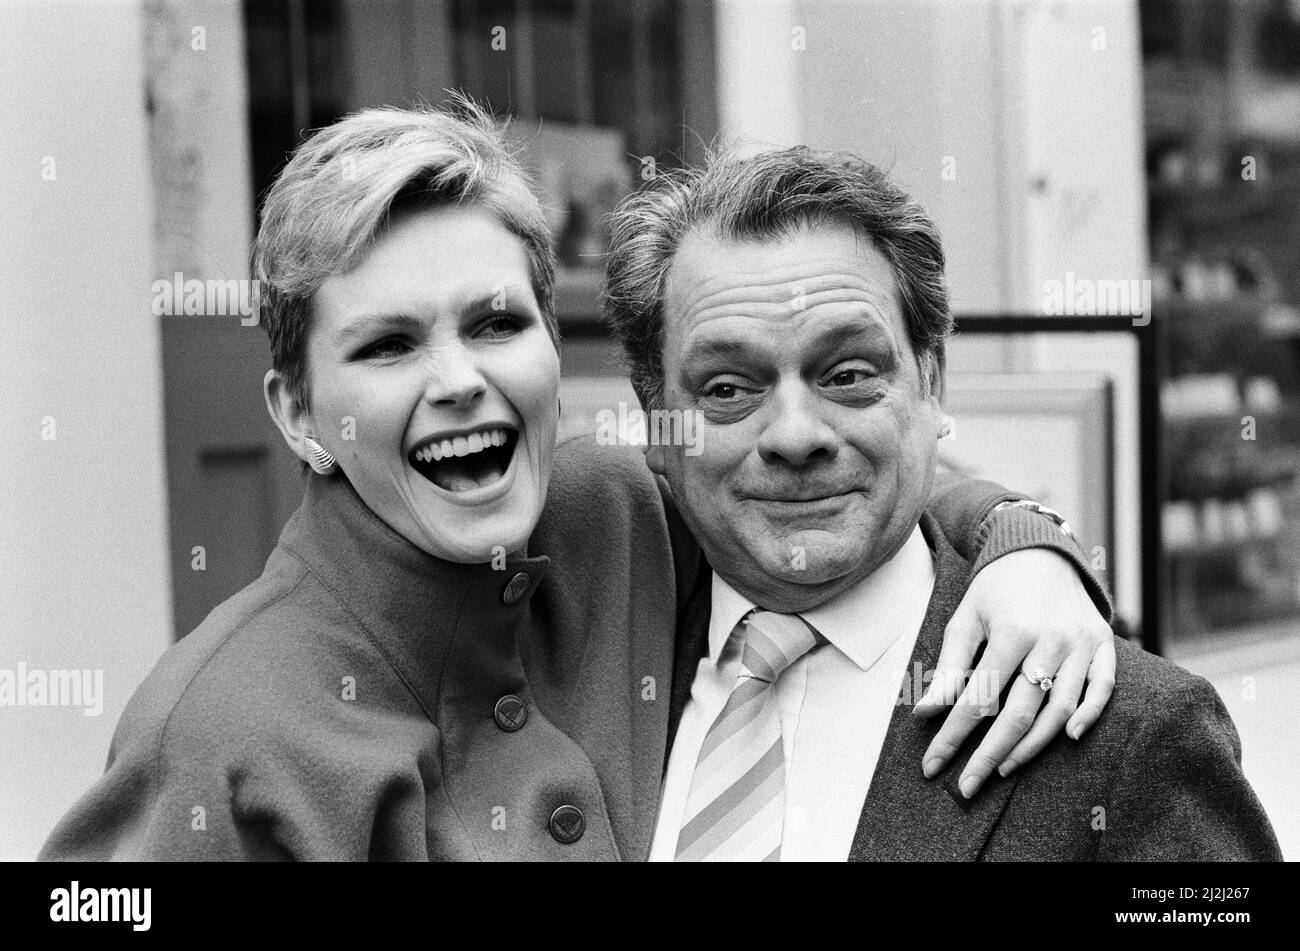 Actor David Jason who stars in Channel 4's production of Porterhouse Blue, with Fiona Fullerton who appears in Hold That Dream. 31st March 1987. Stock Photo